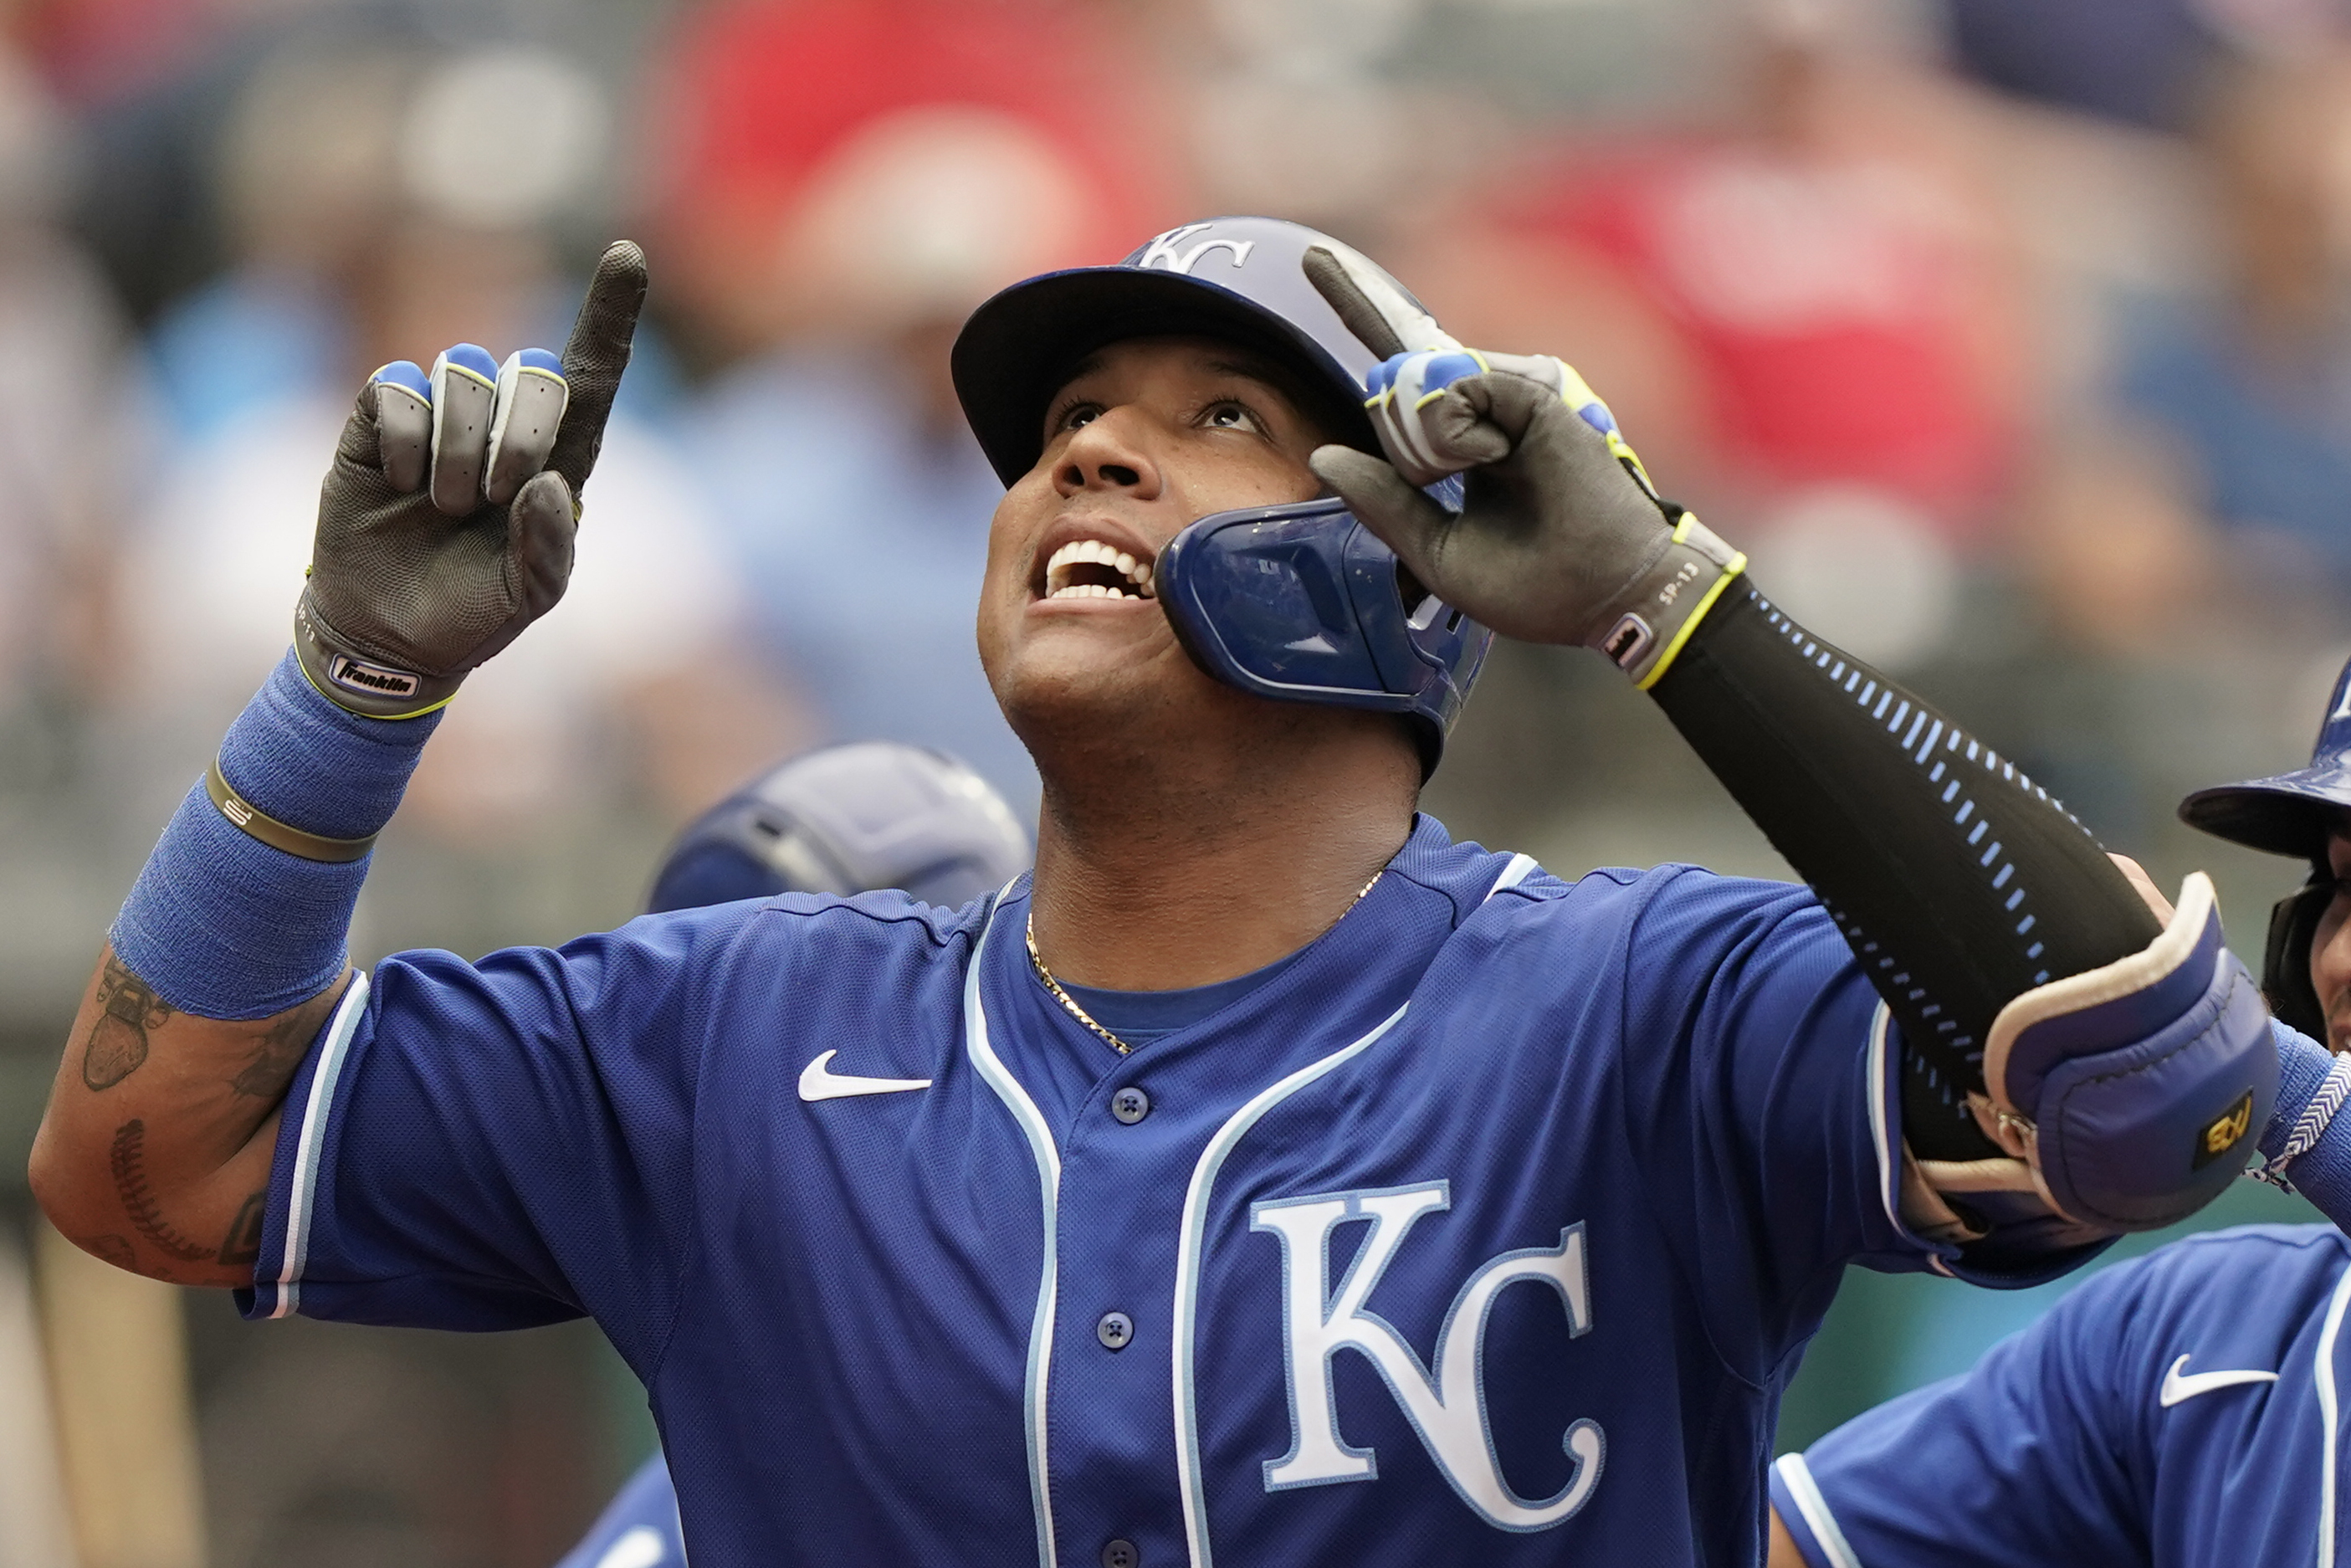 Watch: Royals' Salvador Perez passes Johnny Bench with 46th home